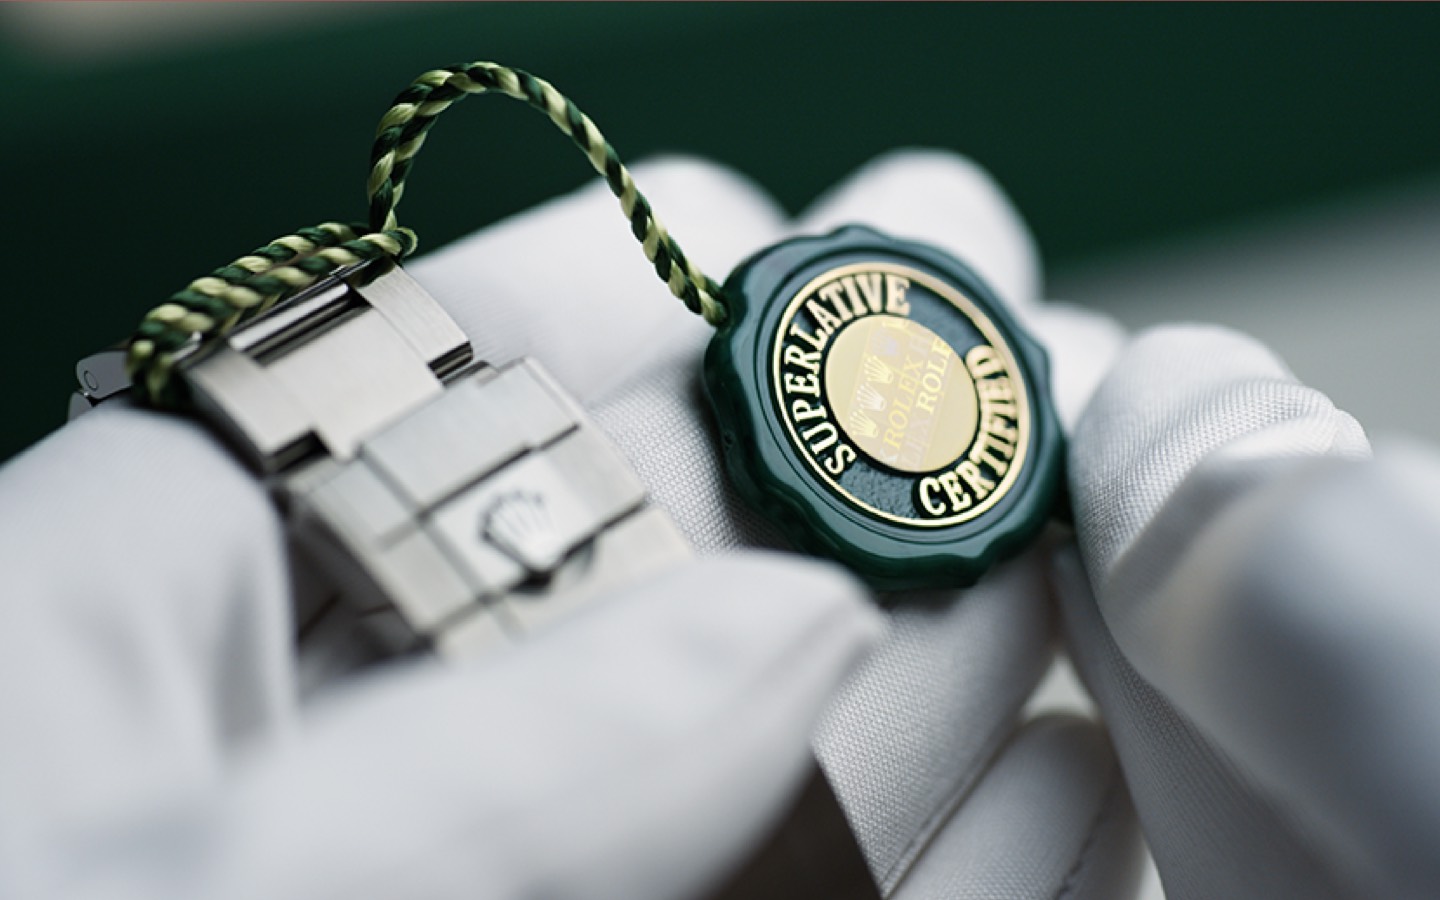 rolex-watchmaking-more-than-a-certification-a-state-of-mind.jpg